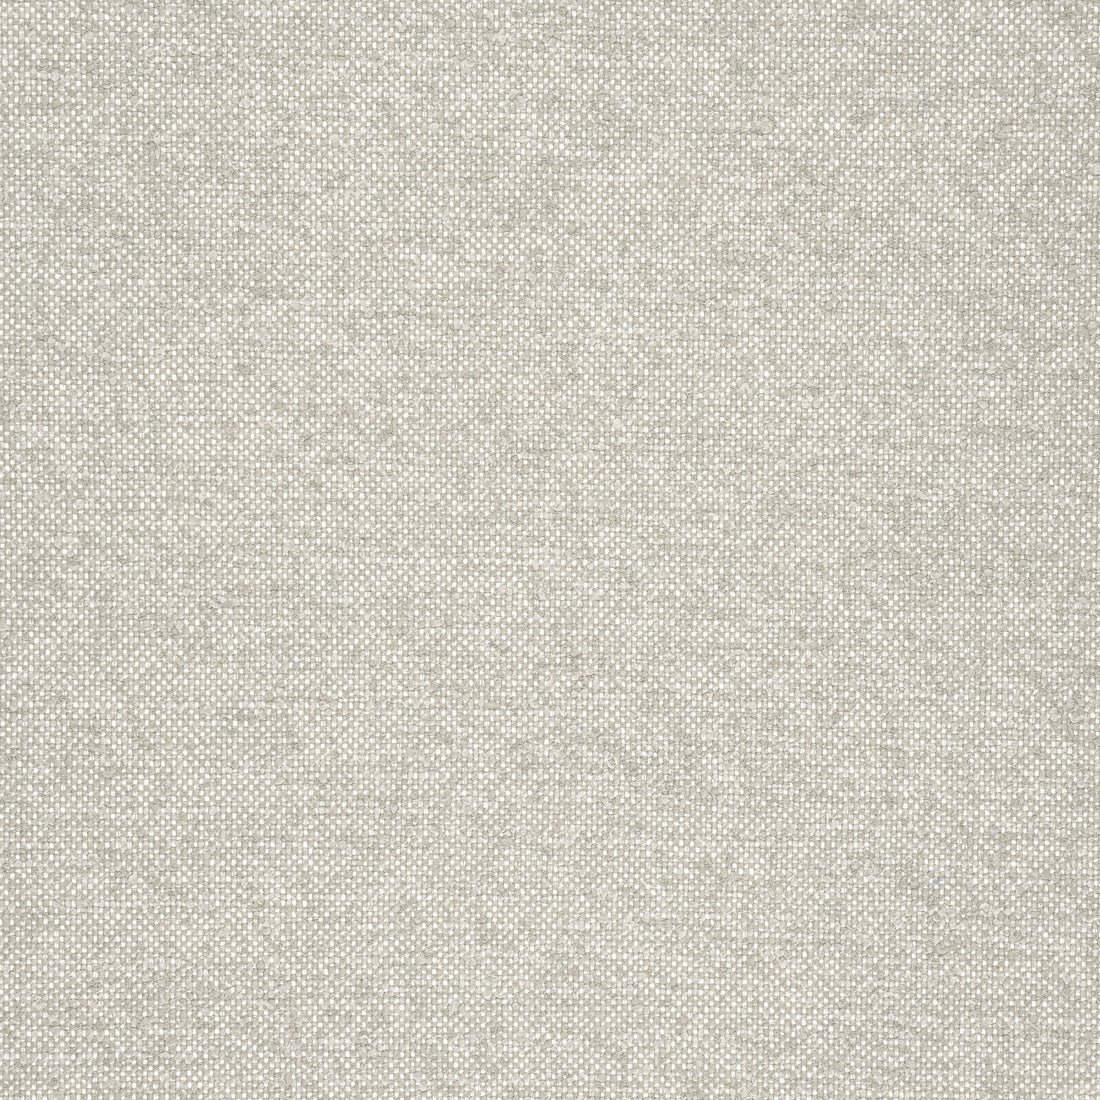 Sasso fabric in stone color - pattern number W77103 - by Thibaut in the Veneto collection